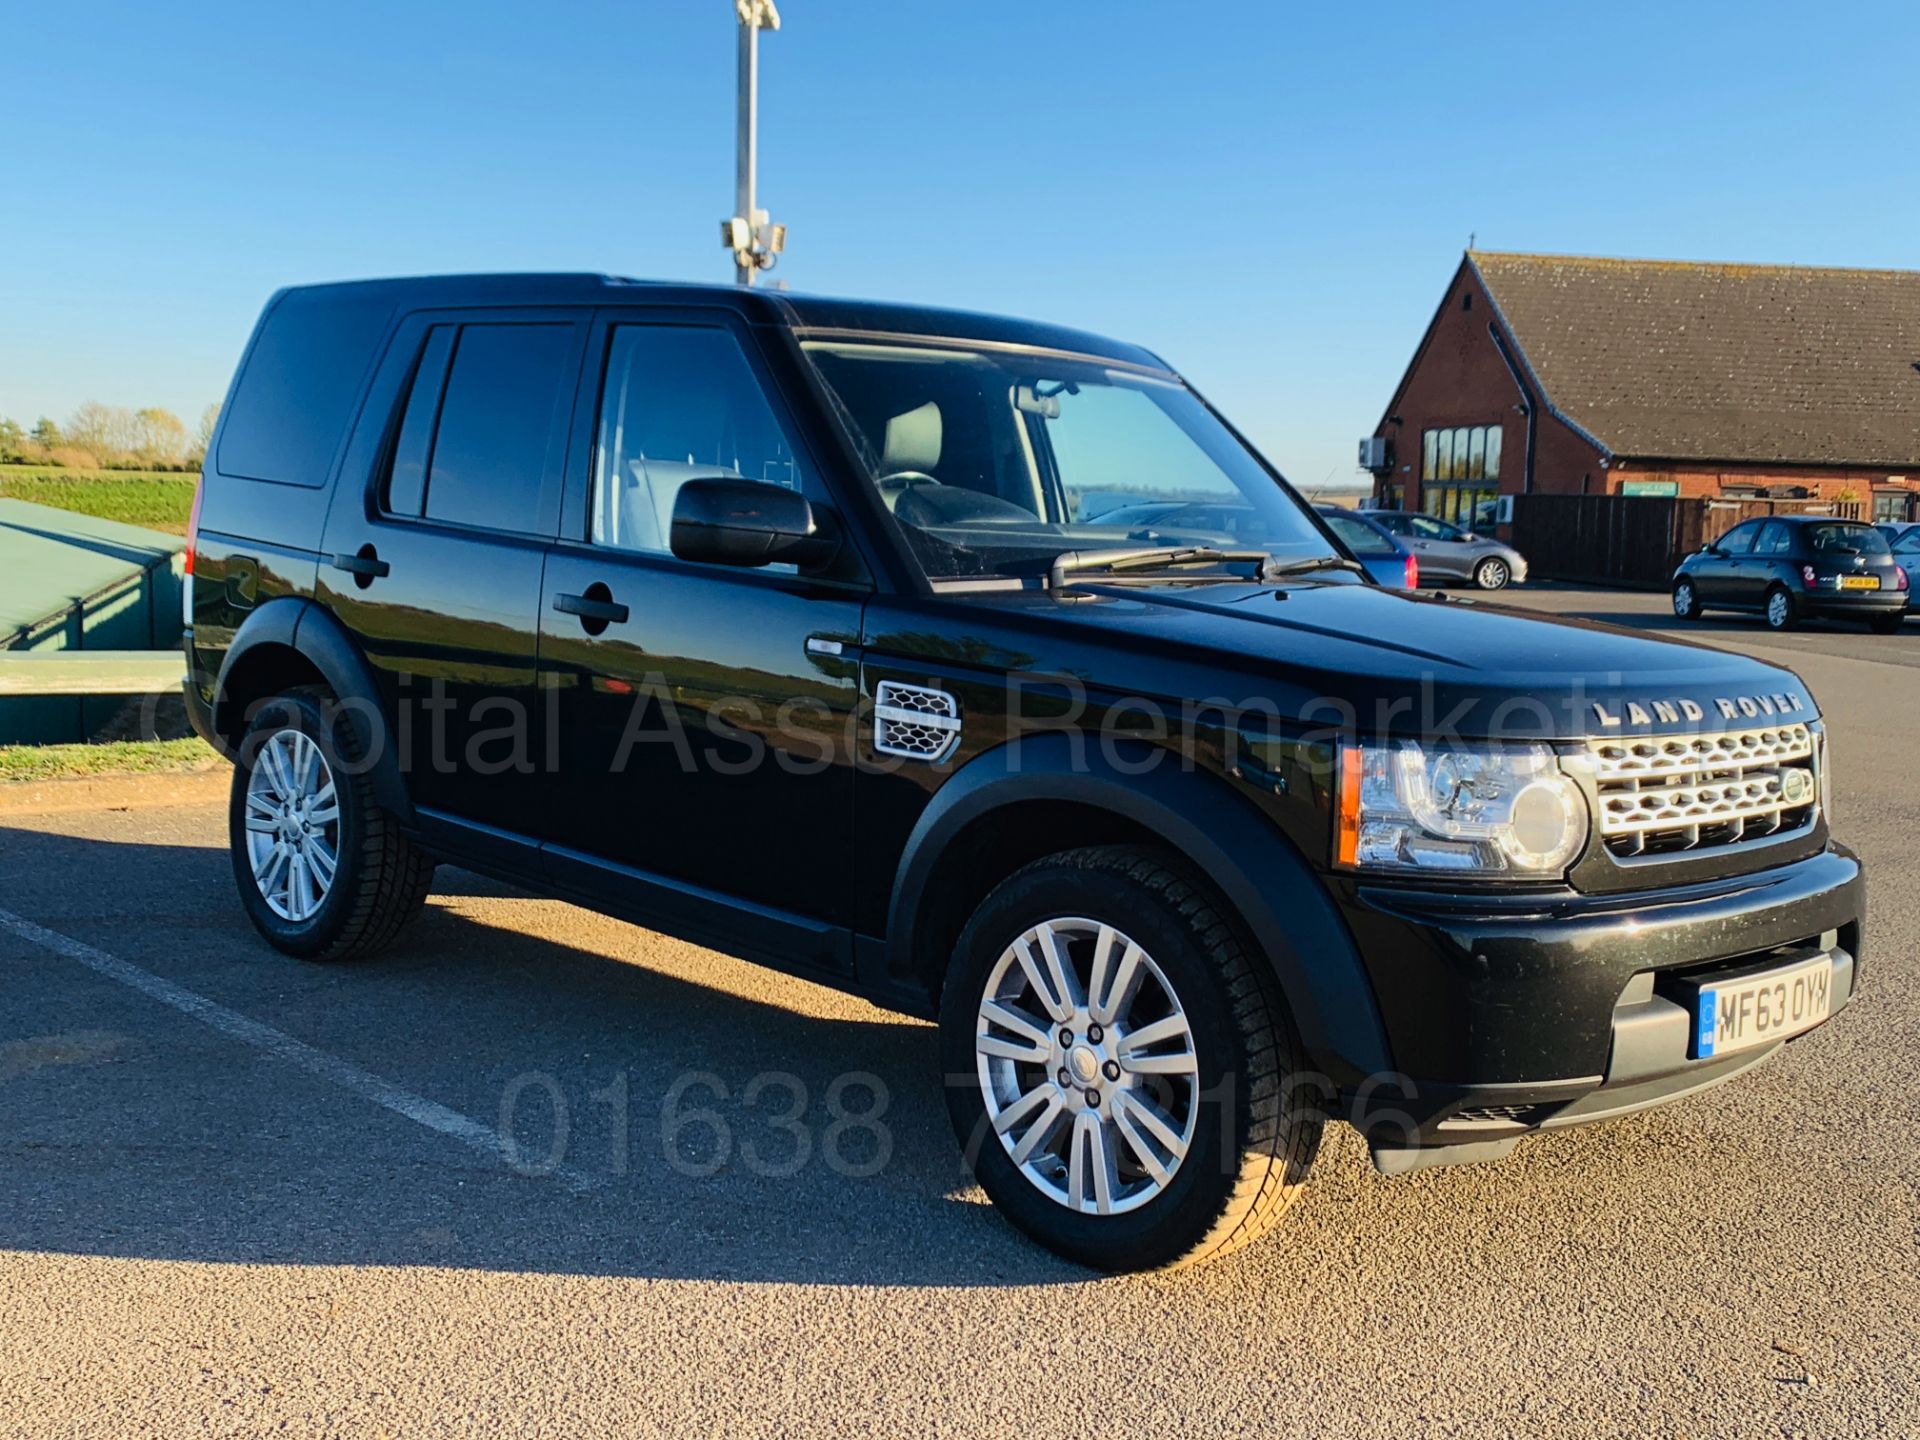 (On Sale) LAND ROVER DISCOVERY 4 (63 REG) '3.0 SDV6 - 8 SPEED AUTO' *LEATHER & SAT NAV* *TOP SPEC*